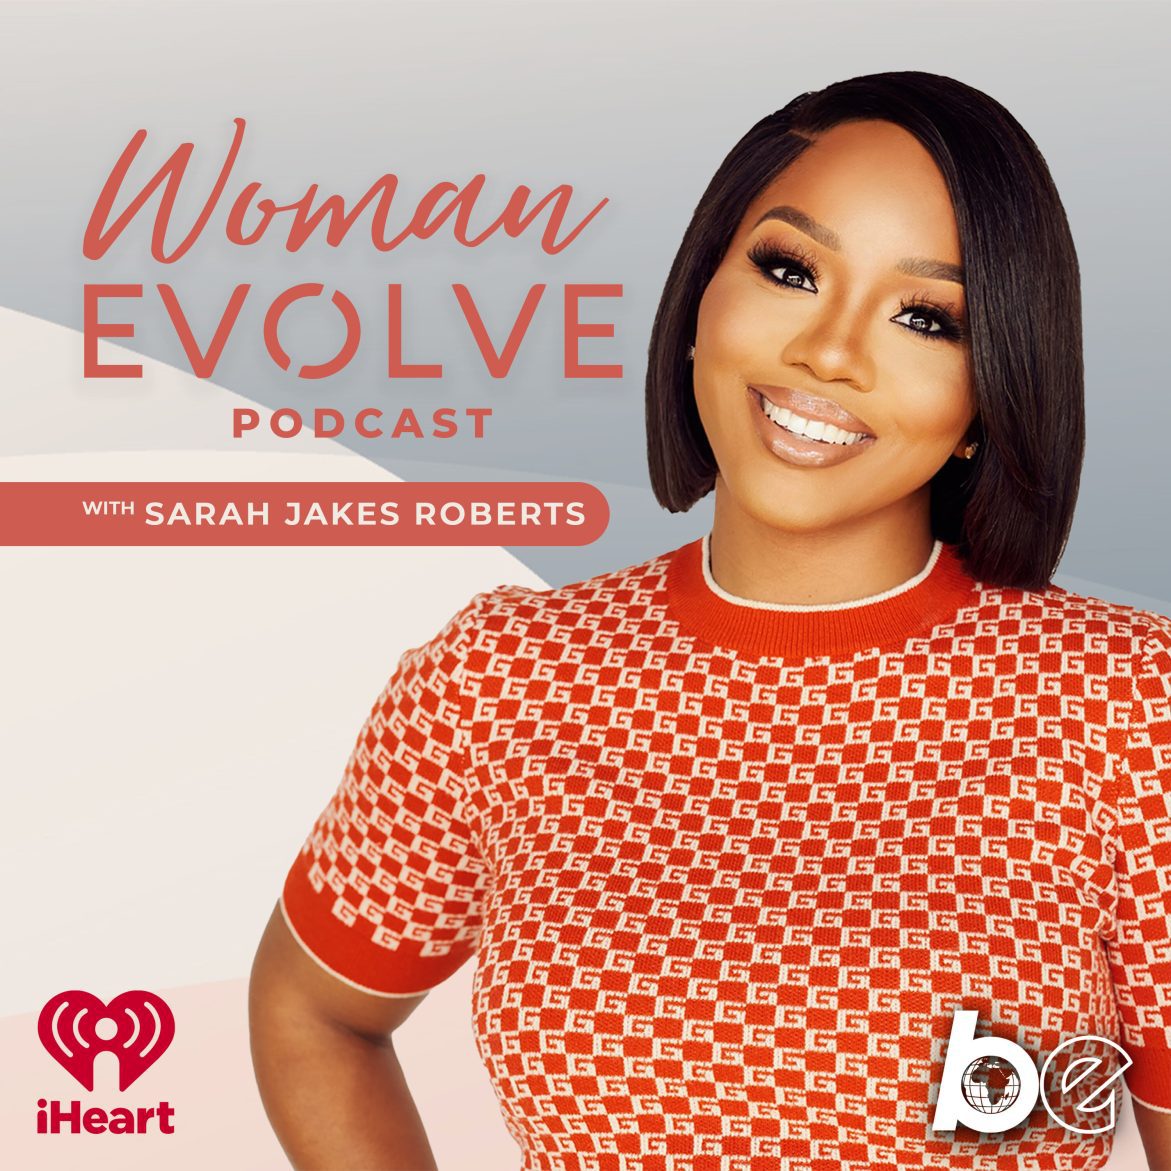 Black Podcasting - Character Development in God w/ Sarah Jakes Roberts